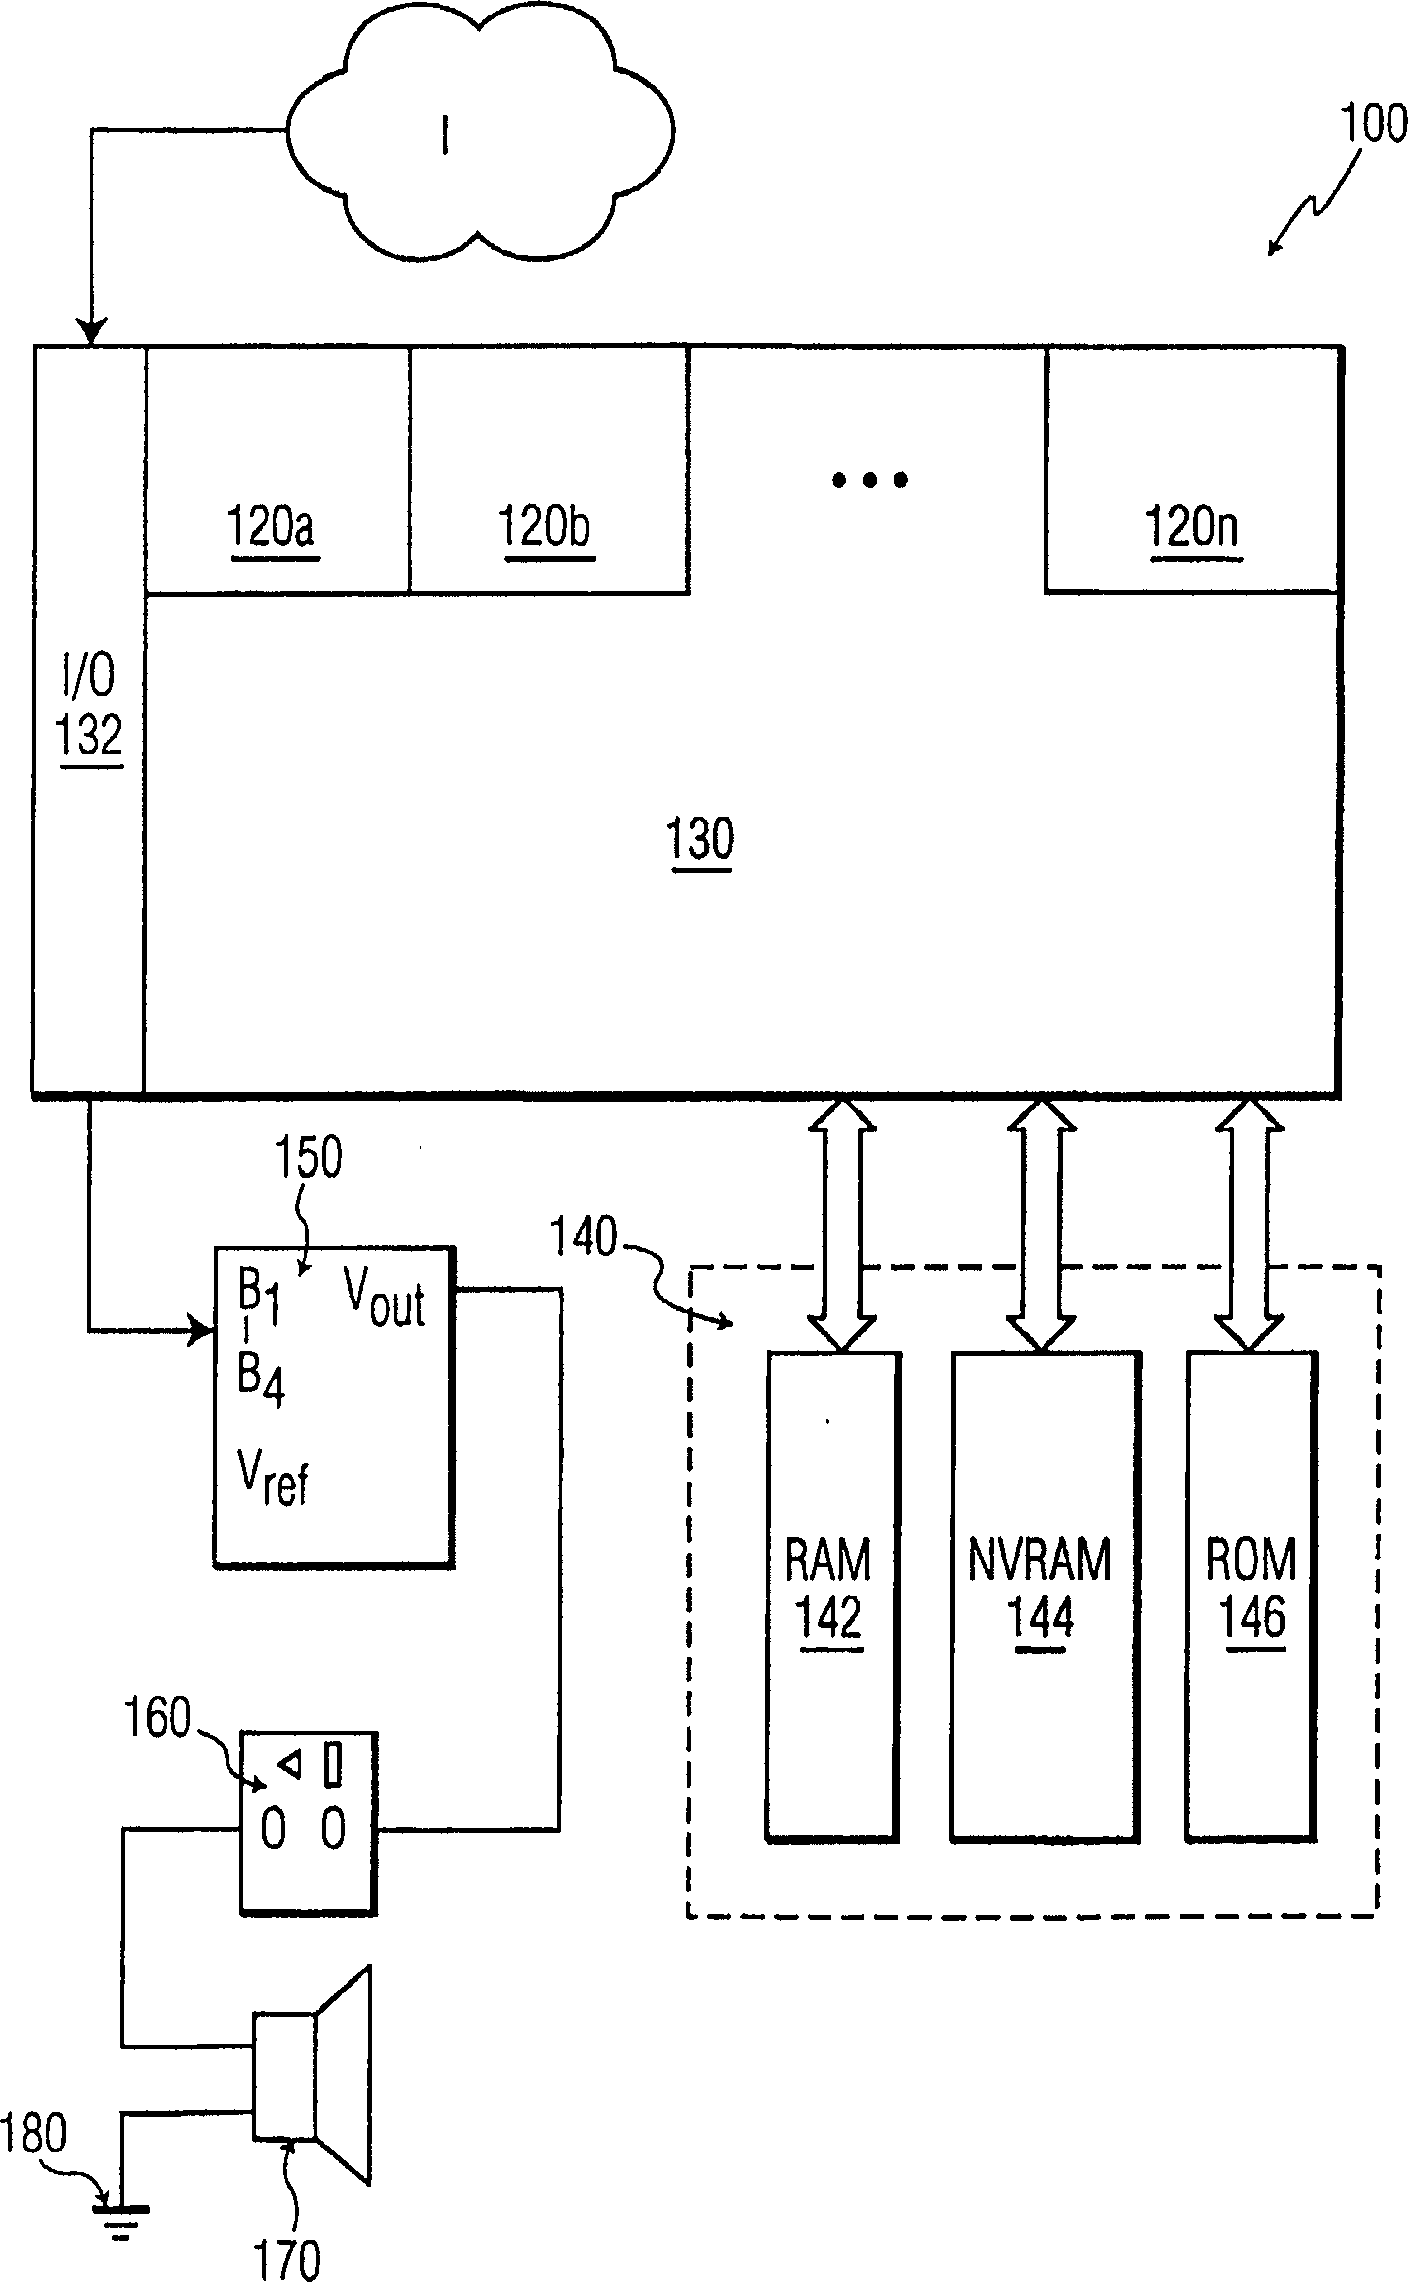 Automatic audio recorder-player and operating method therefor